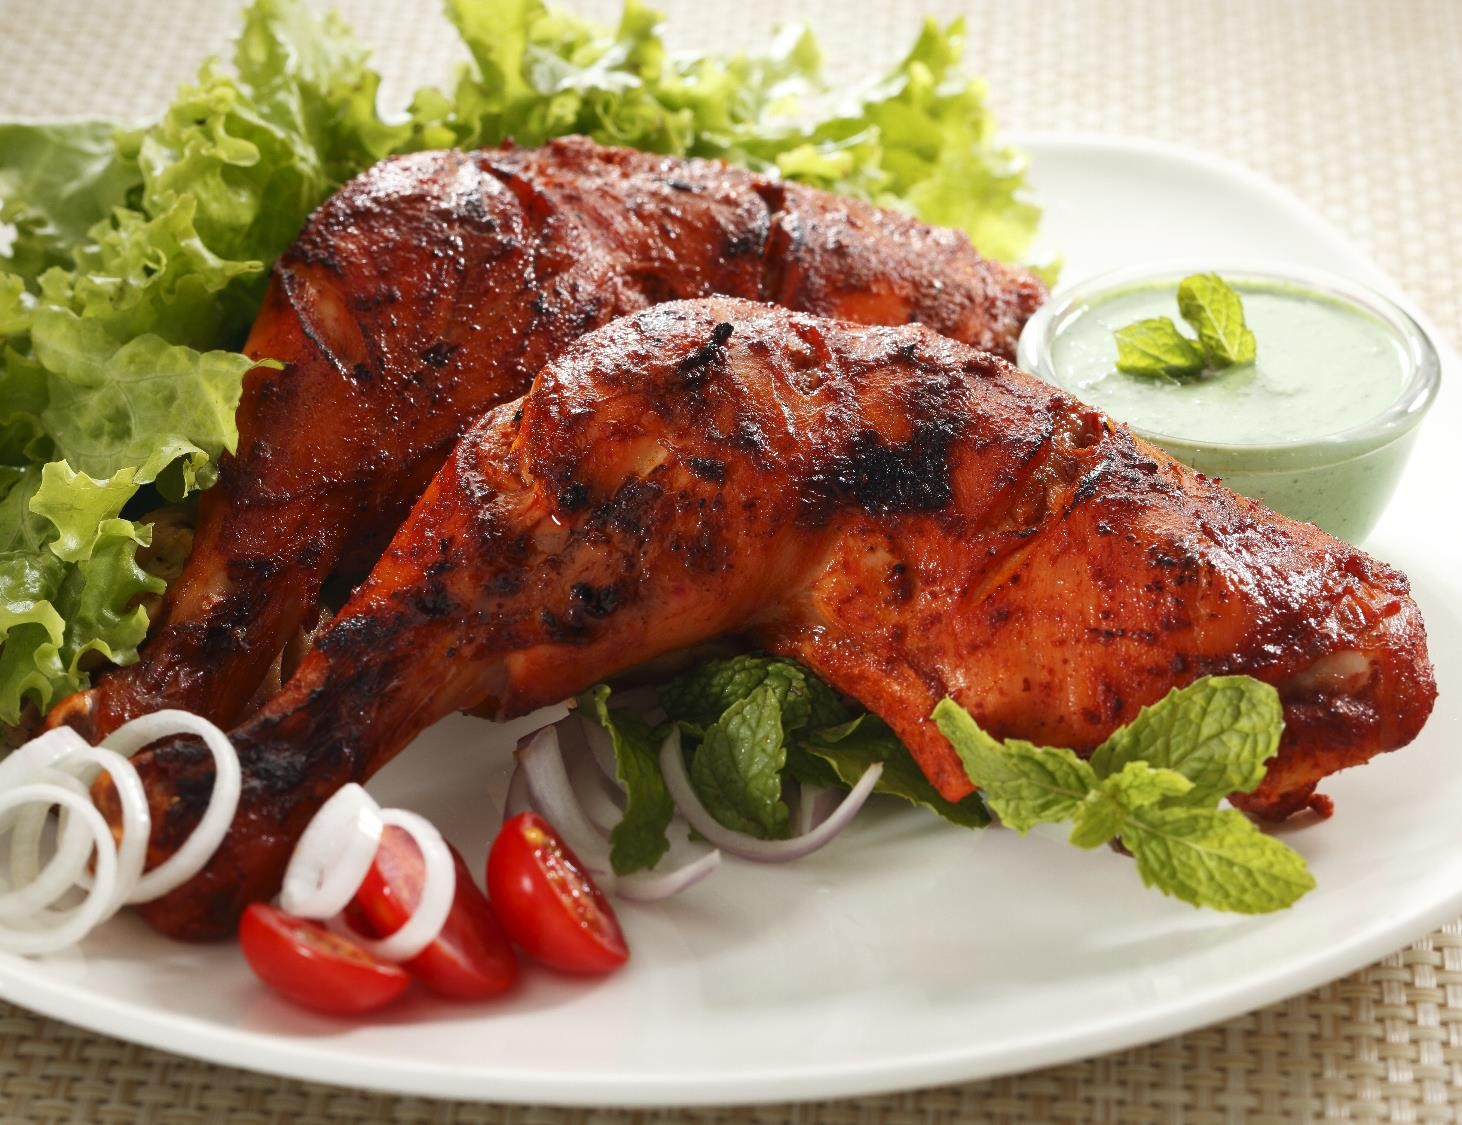 FIND OUT MORE ABOUT TANDOORI SPICES